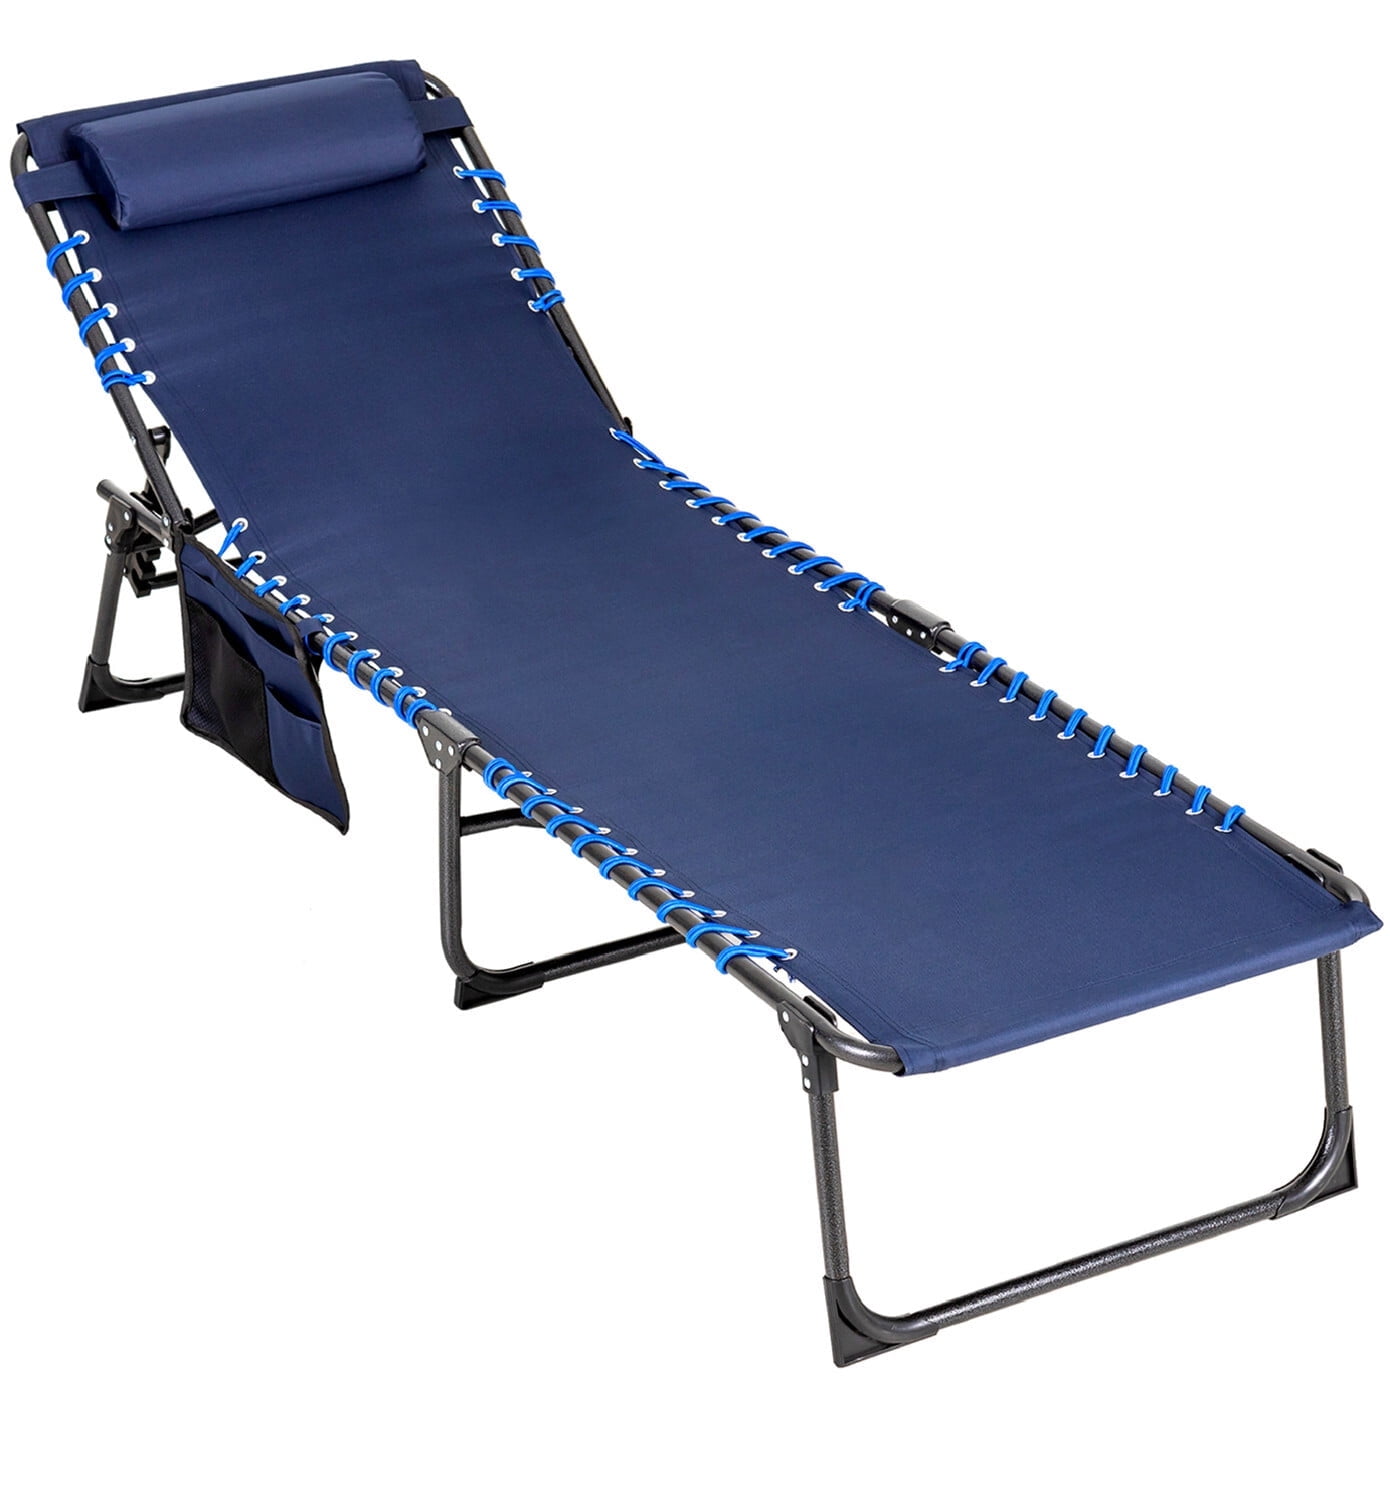 Alpha Camper Folding Chair with W/Pillow & 5 Position Adjustable Backrest for Patio, Camping, and Poolside, Navy - image 1 of 11